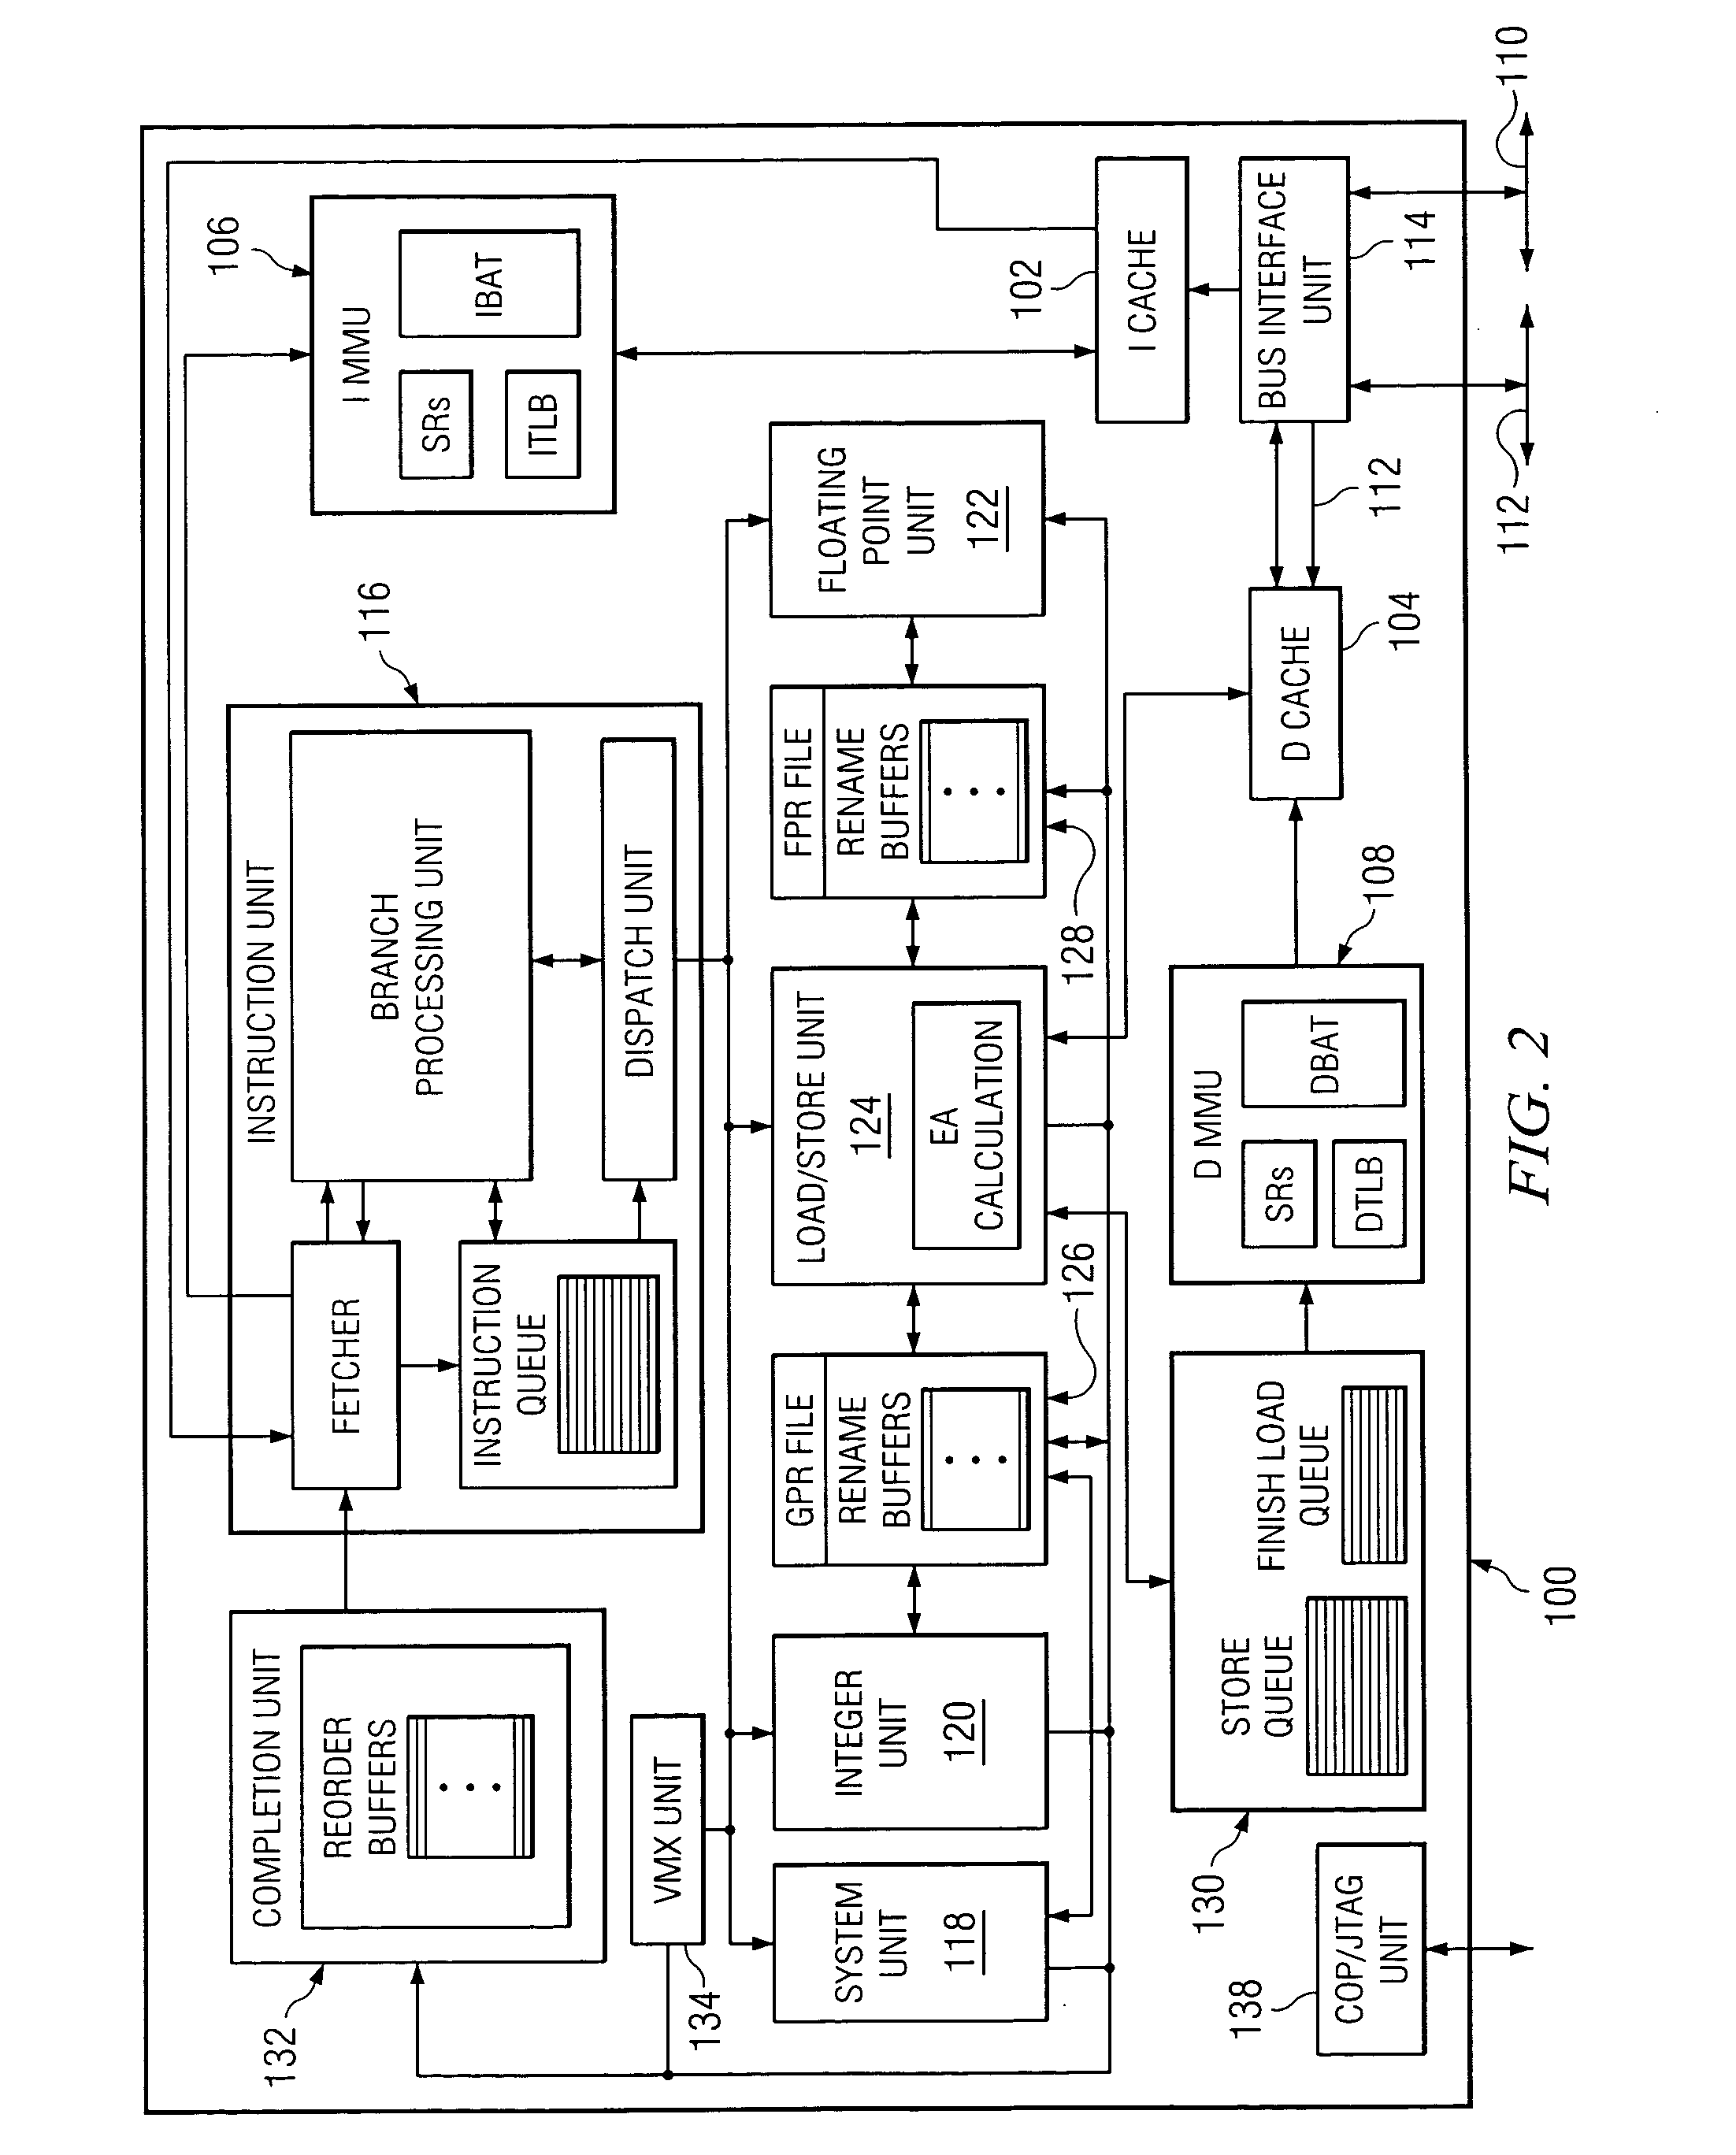 Method, apparatus, and computer program product for synchronizing triggering of multiple hardware trace facilities using an existing system bus